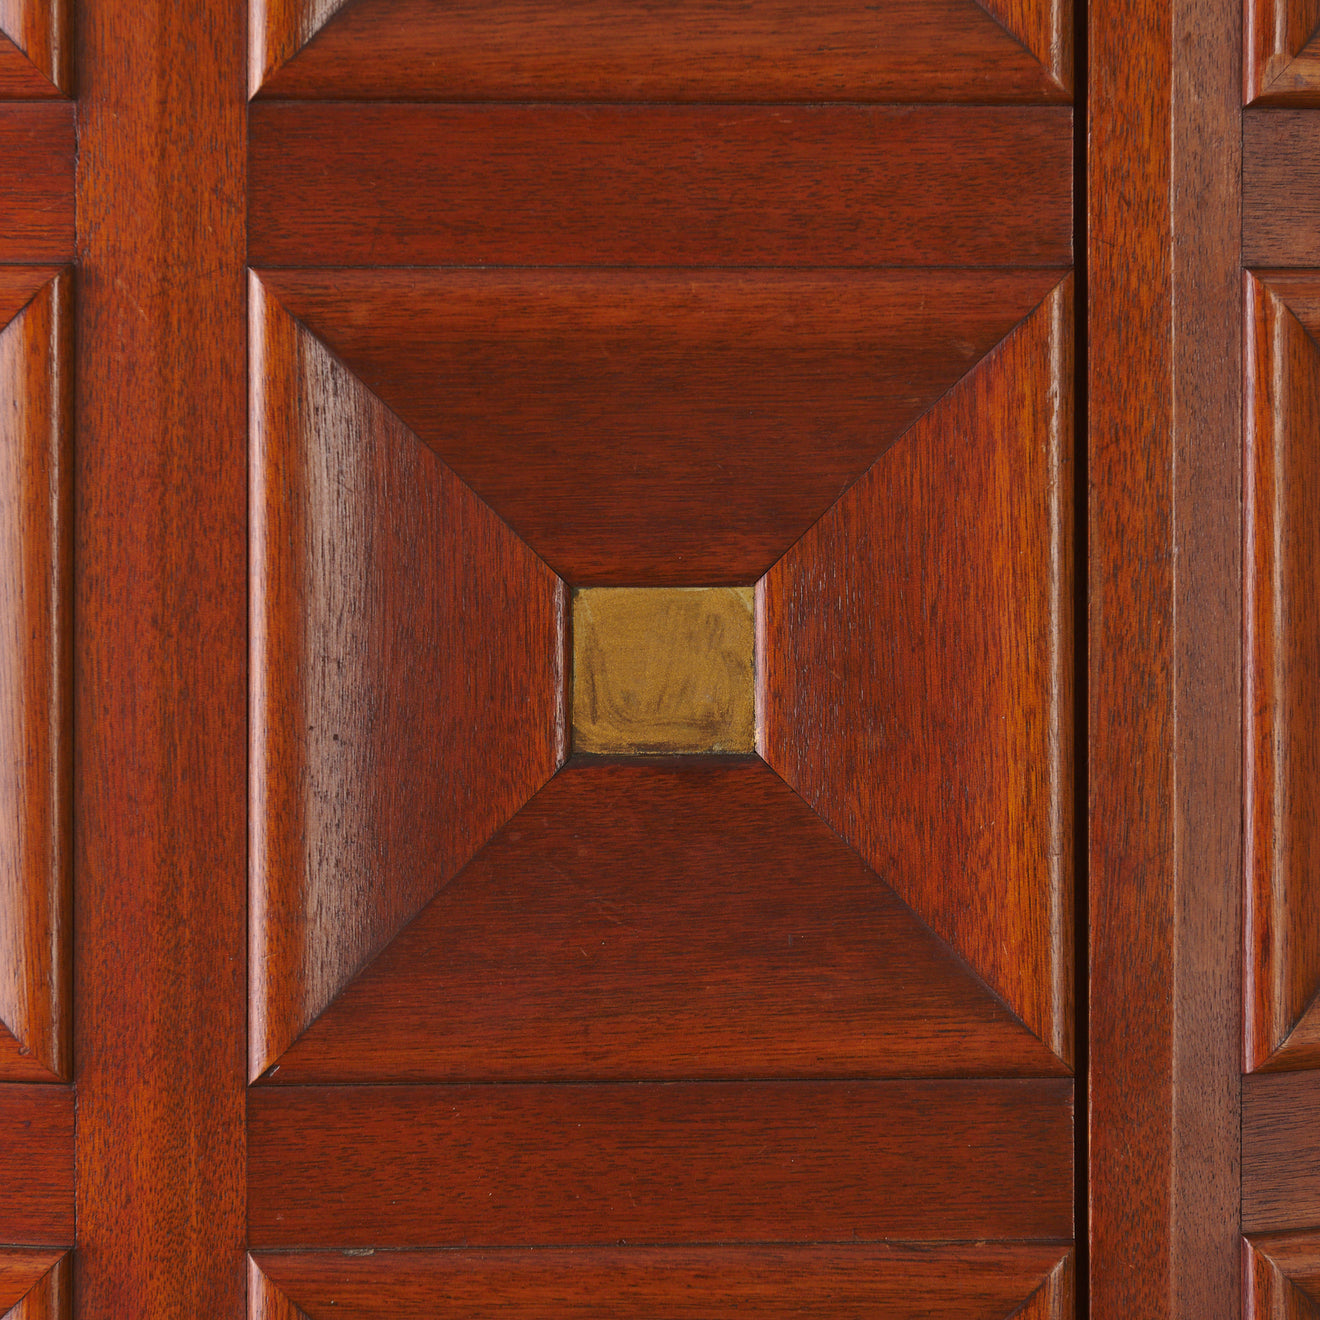 GERMAN CABINET WITH GEOMETRIC PANELING DESIGN